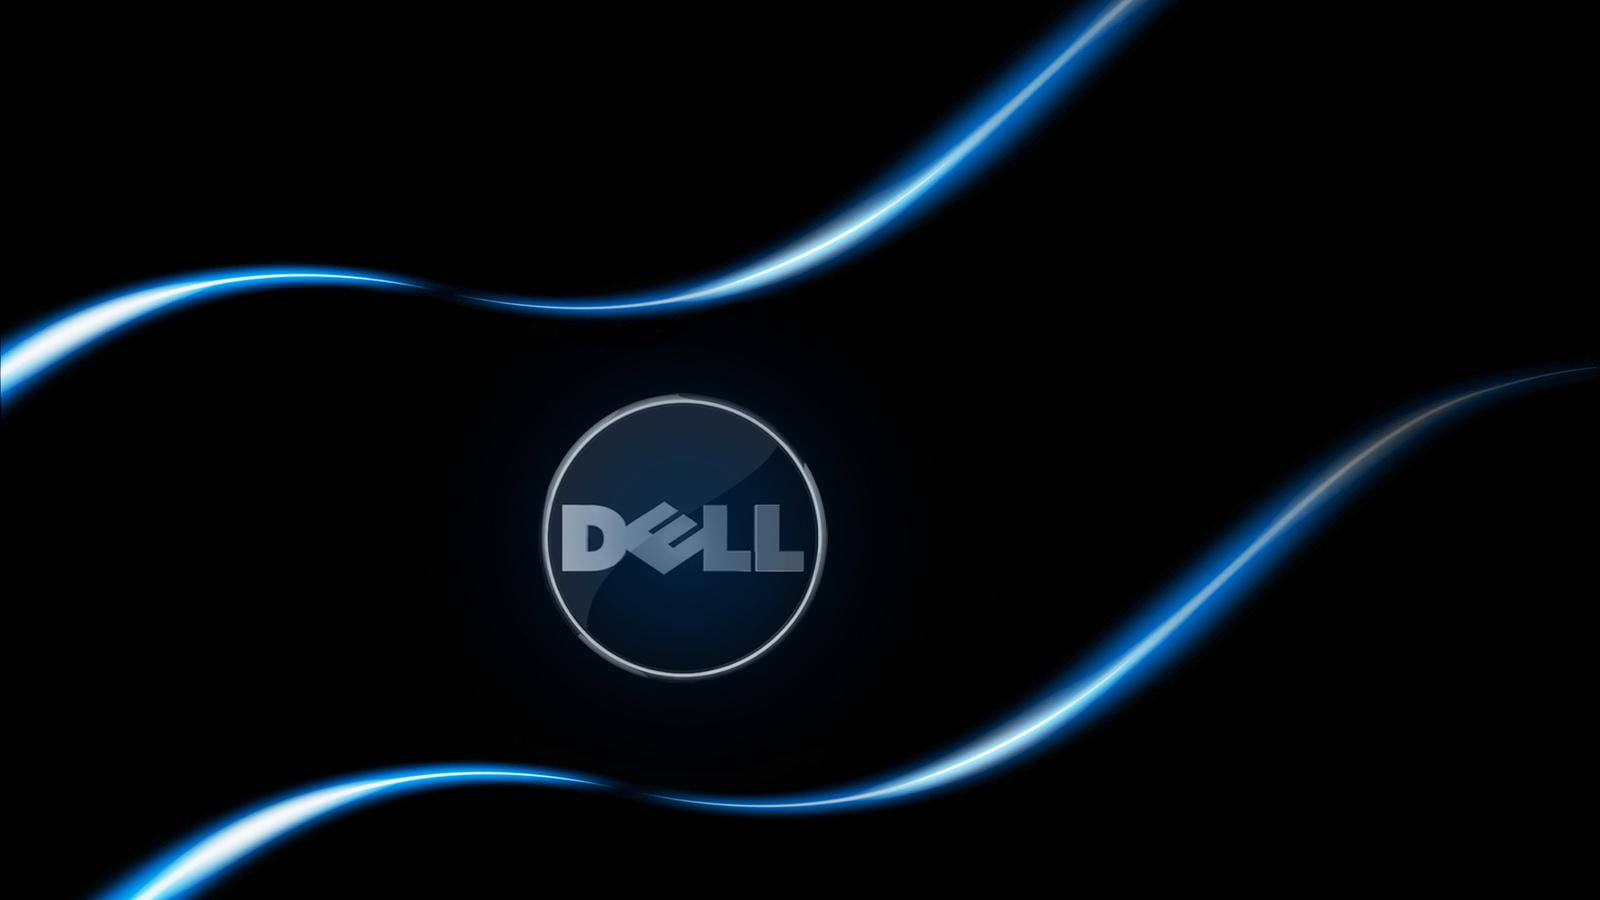 Blue Rays With Dell Hd Logo Wallpaper